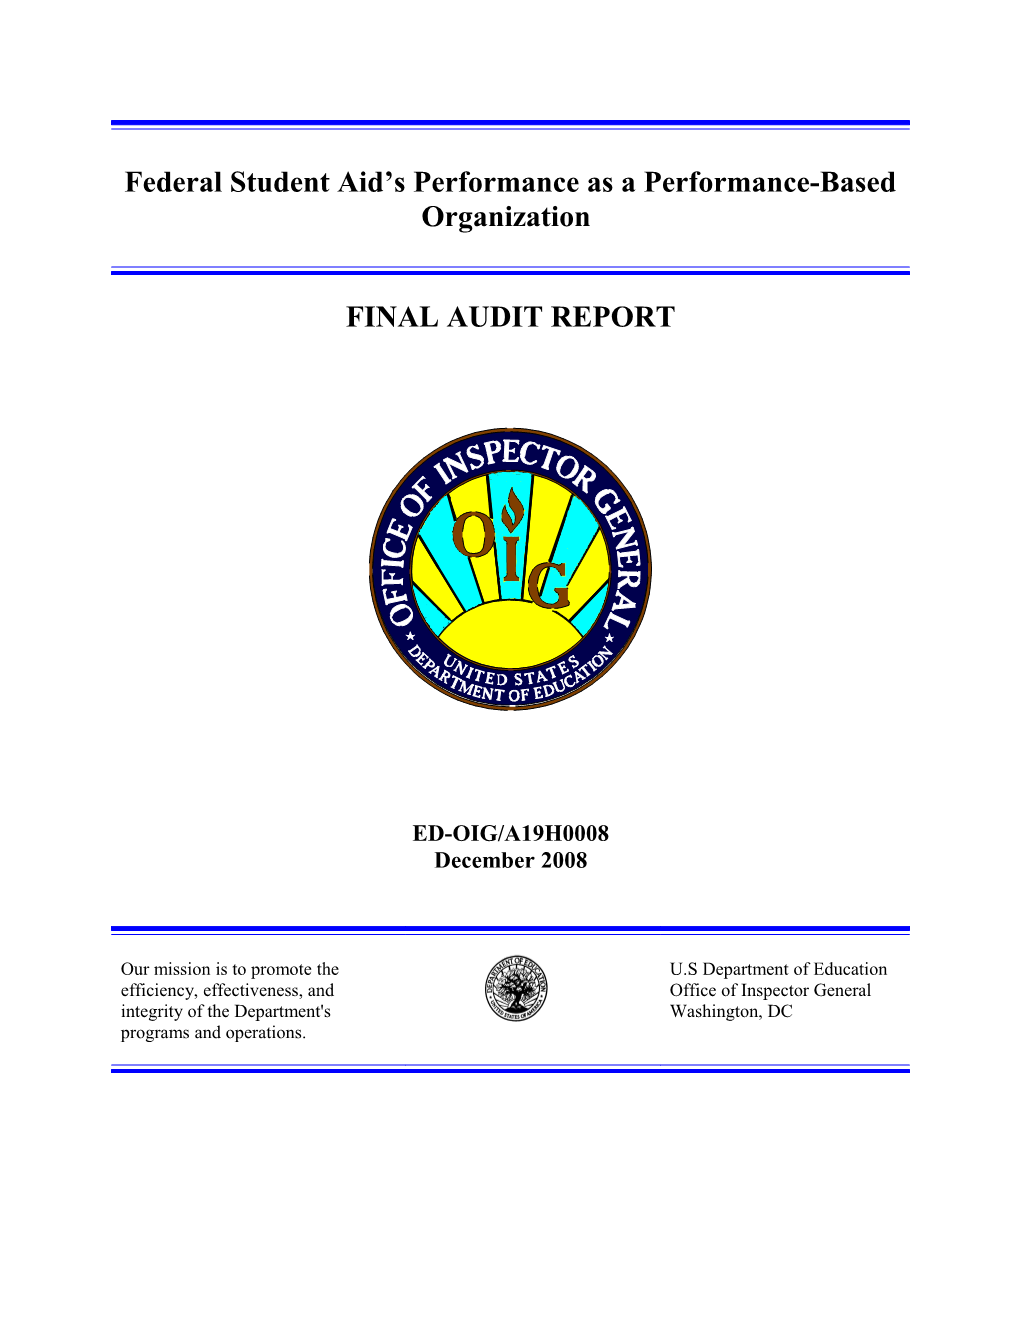 Audit A19H0008 - Federal Student Aid's Performance As a Performance-Based Organization (MS Word)